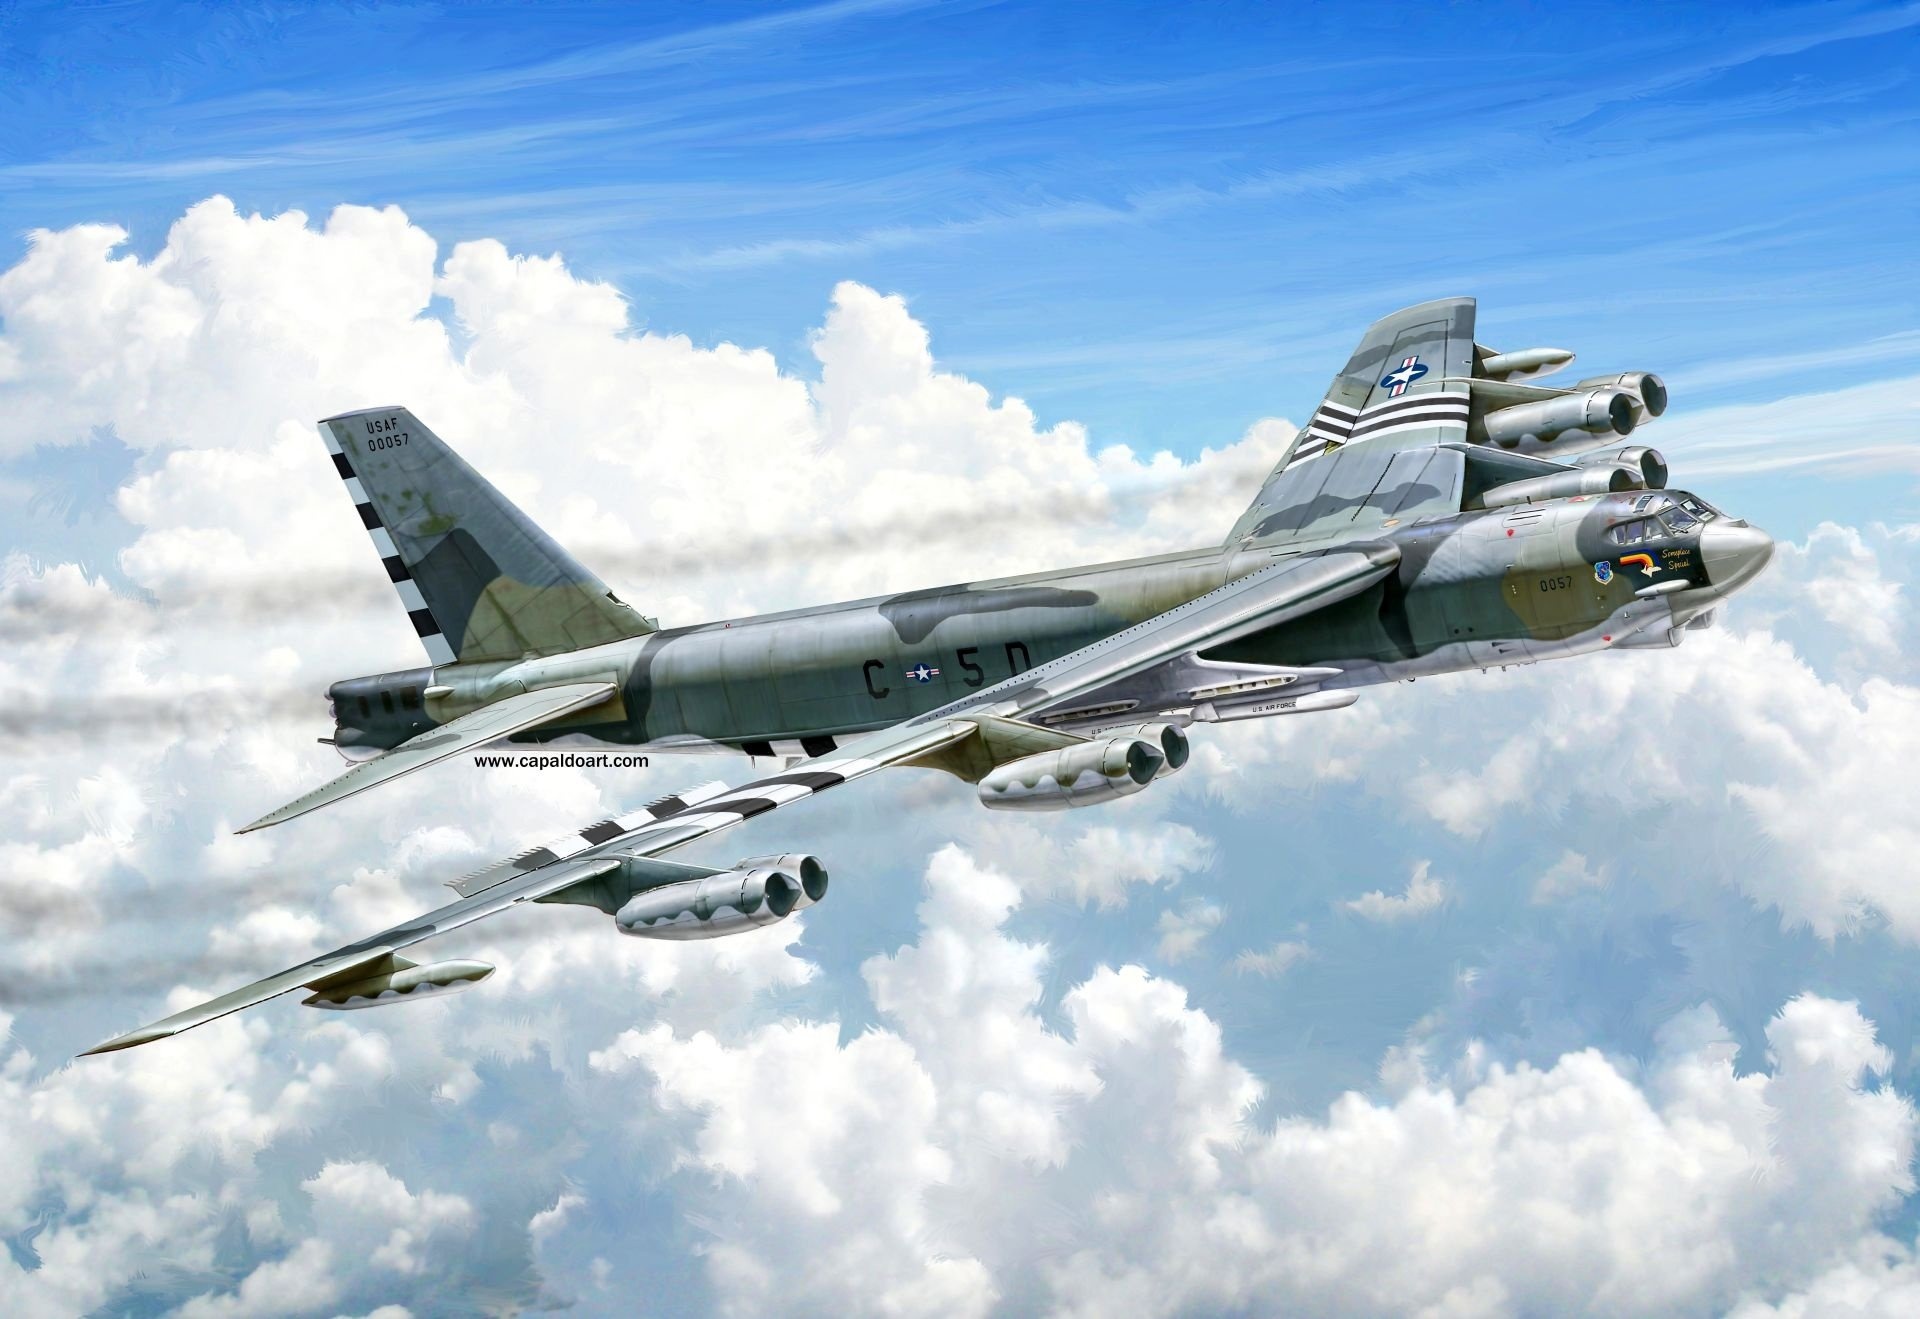 Boeing B-52 Stratofortress, HD aviation wallpaper, Military power, Air Force might, 1920x1320 HD Desktop